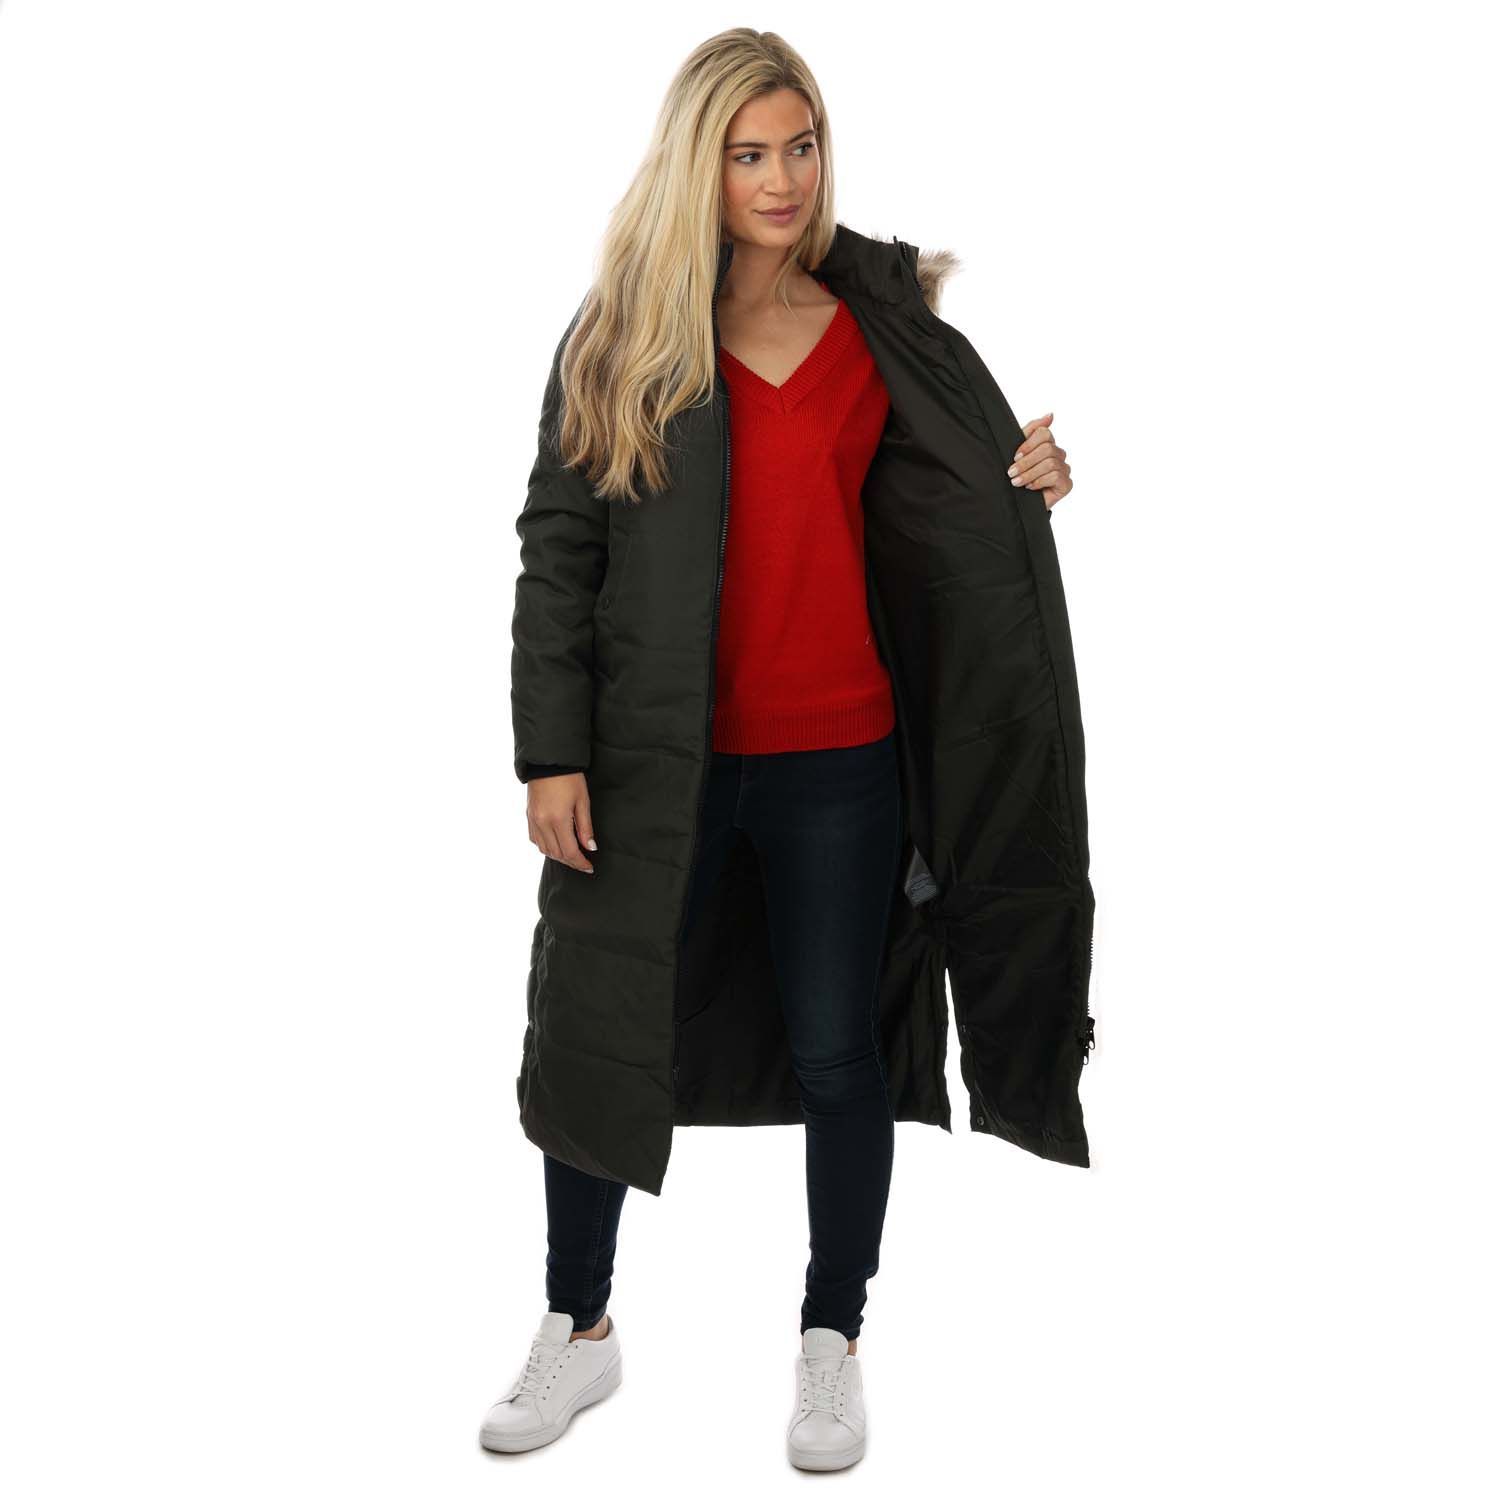 Womens Vero Moda Addison Long Coat in black.- Faux fur lined hood.- Two-way zipper.- Pockets to sides with popper closure.- Elasticated cuffs for extra warmth.- Full padded.- Horizontal stitch detail.- Fully lined.- 100% Polyester.  Machine washable.- Ref: 10267116